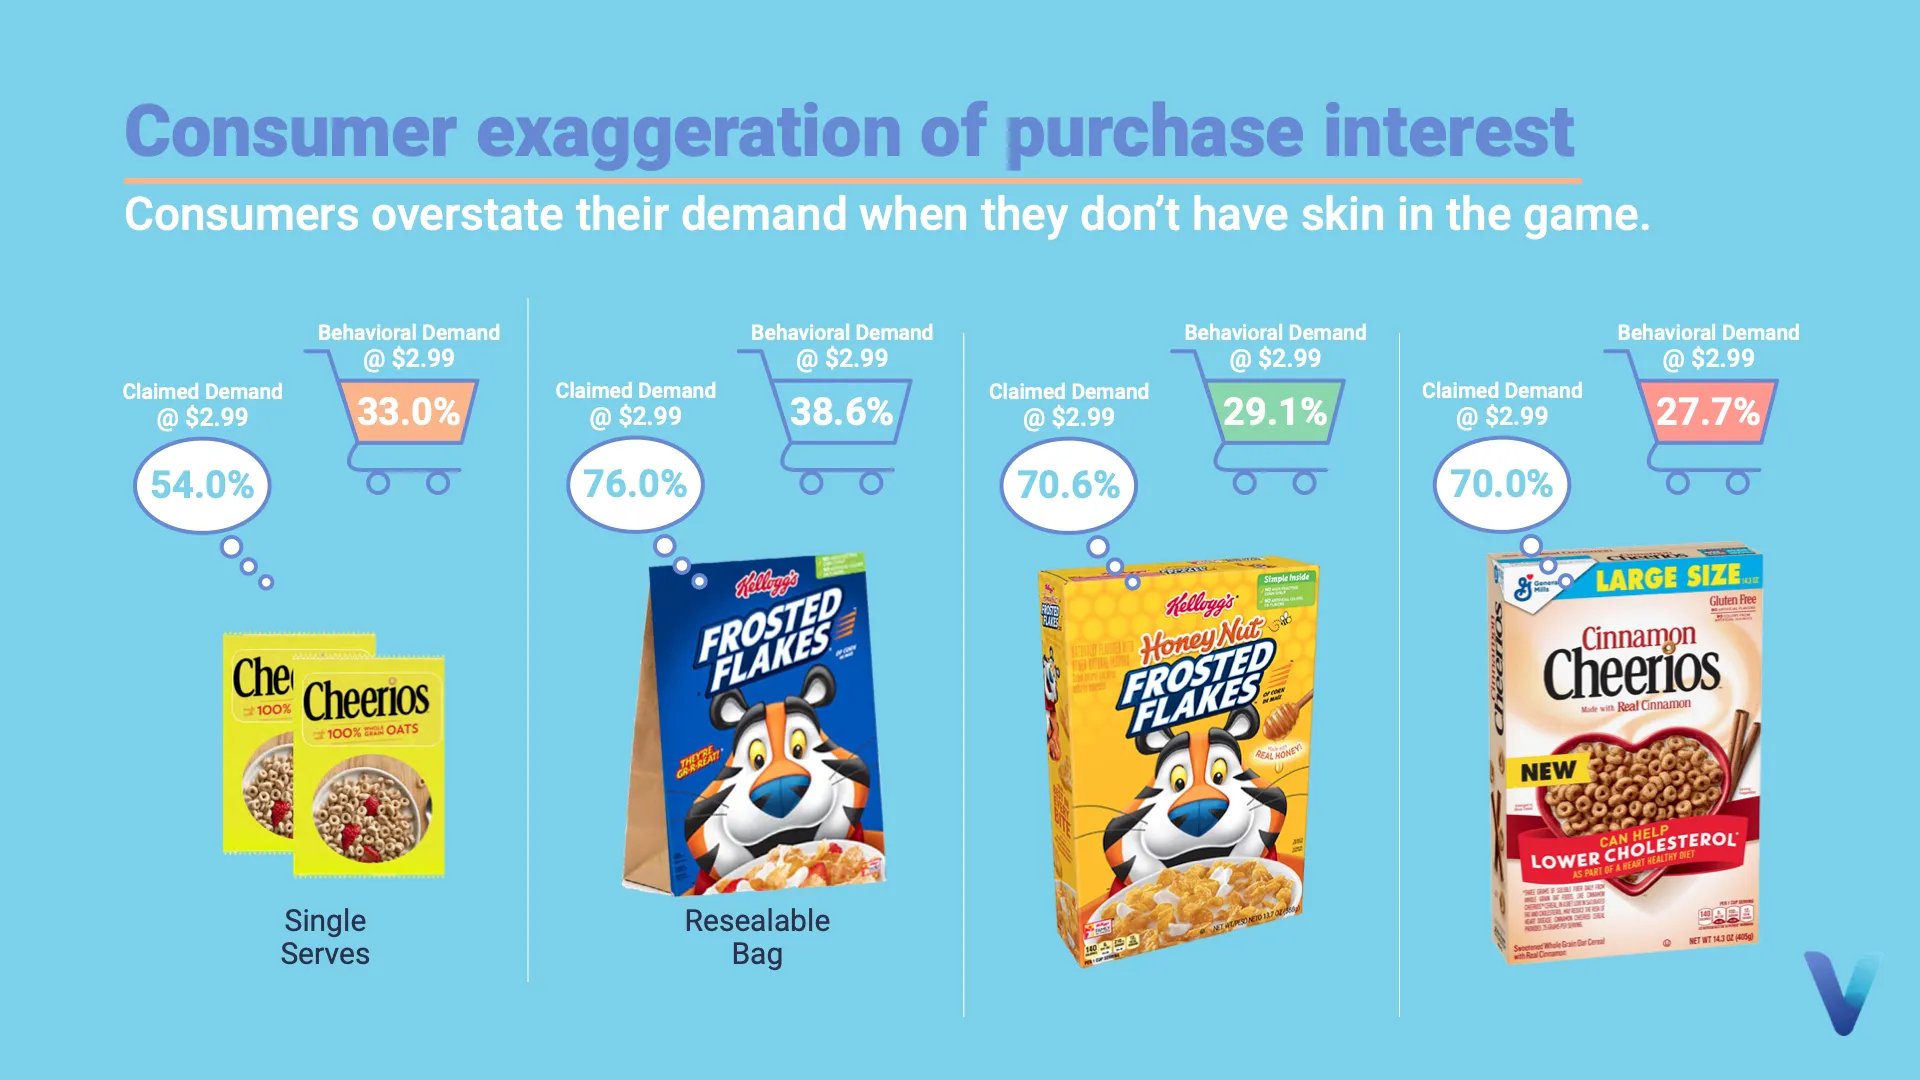 Consumers tend to overstate their demand in market research when they don't have skin in the game